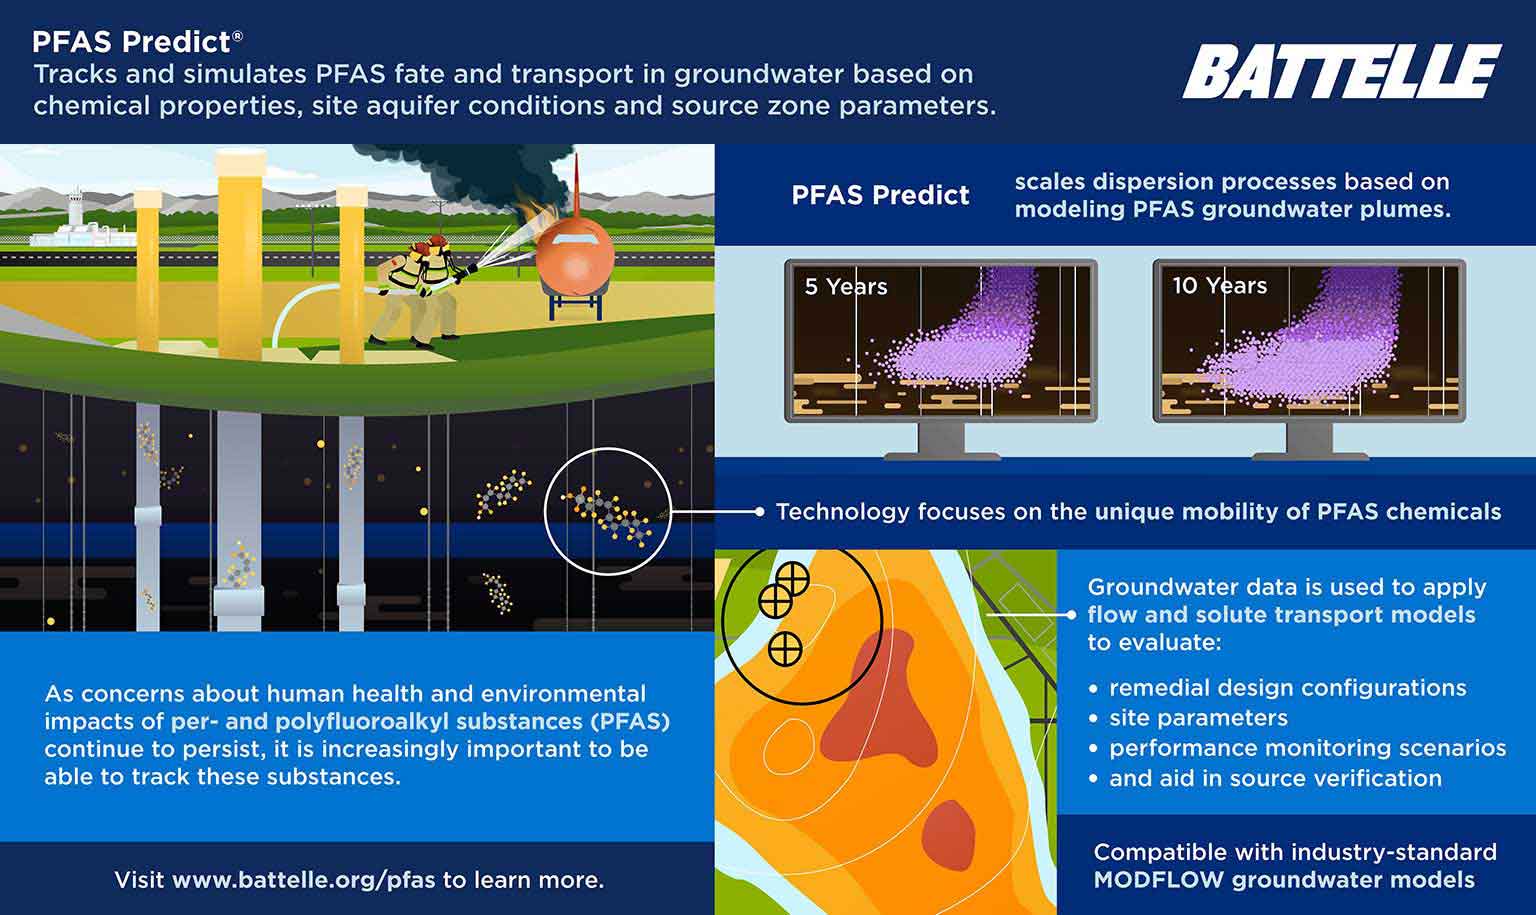 Photo: Infographic showing how Battelle's PFAS Predict technology is compatible with MODFLOW groundwater flow models